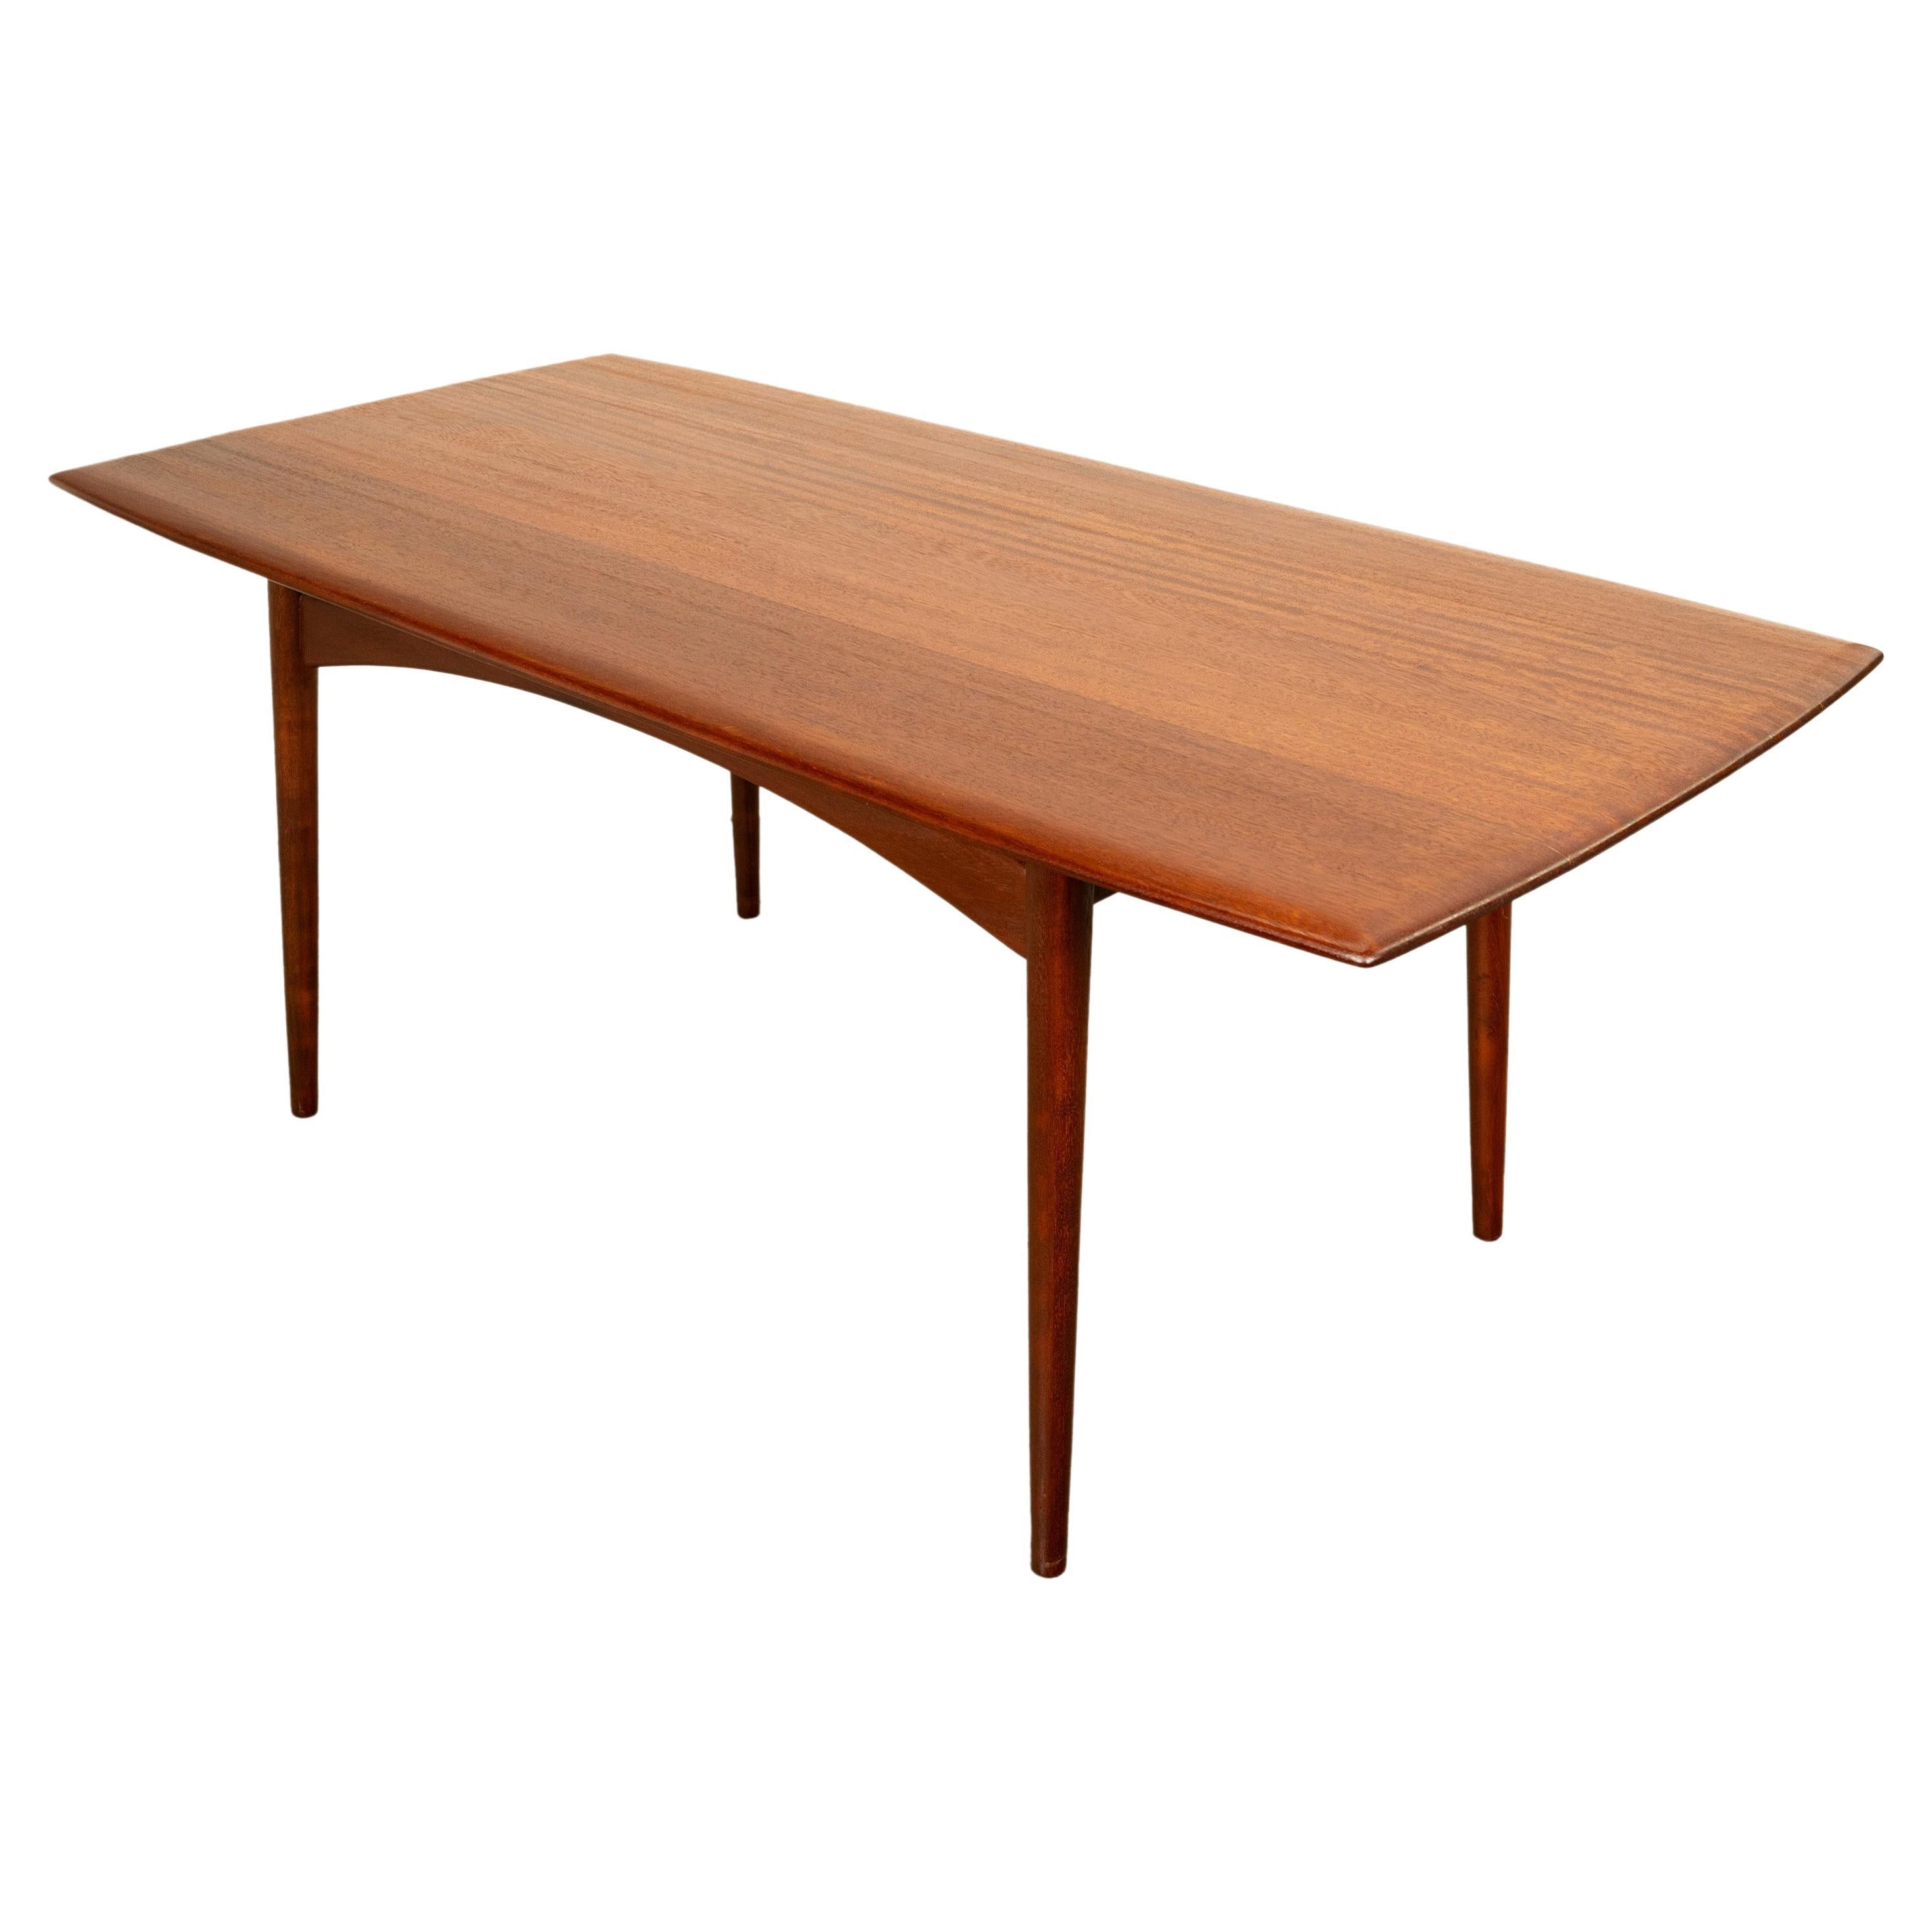 A very good Mid Century Modern Afromosia teak dining table, 1960.
This very stylish MCM dining table is made from solid Afromosia wood (referred to as African teak). The table was designed by Malcolm David Walker for the family firm known as